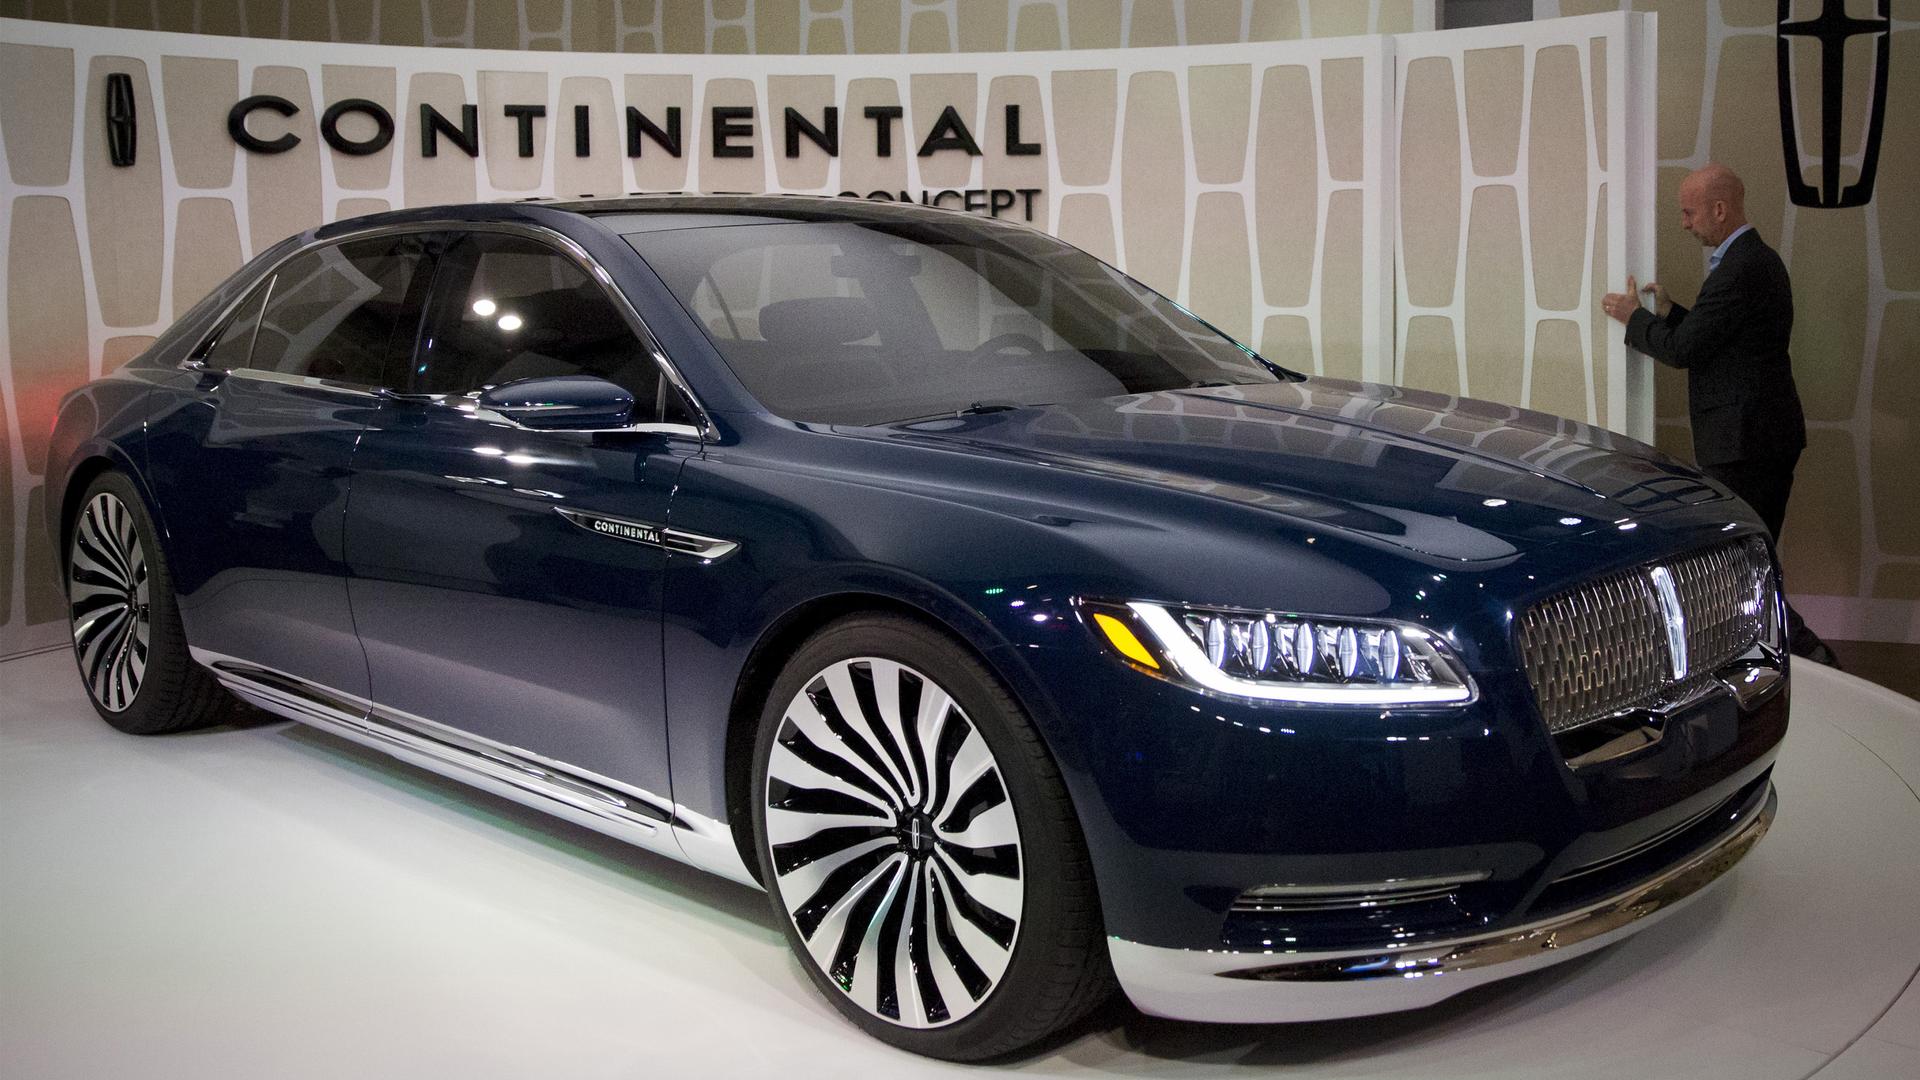 Ford Motor Co. unveils the Lincoln Continental concept car at an event ahead of the New York International Auto Show in New York on March 30, 2015. Ford Motor Co will resurrect the Lincoln Continental as its top-of-the line luxury sedan, betting the class